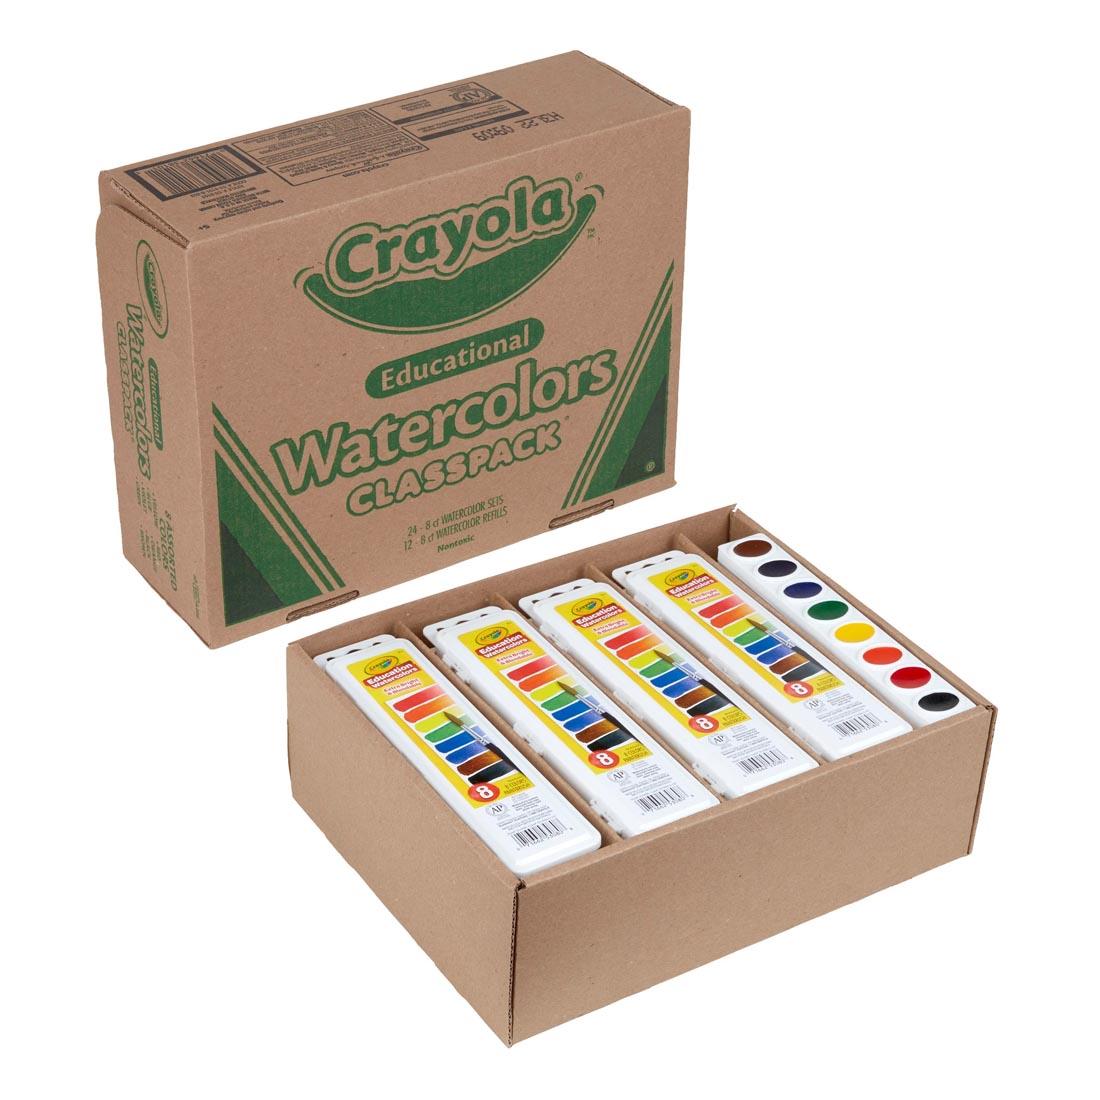 Crayola Oval Pan Watercolors Classpack Box plus the 8-Color Sets and 8-Color Refills